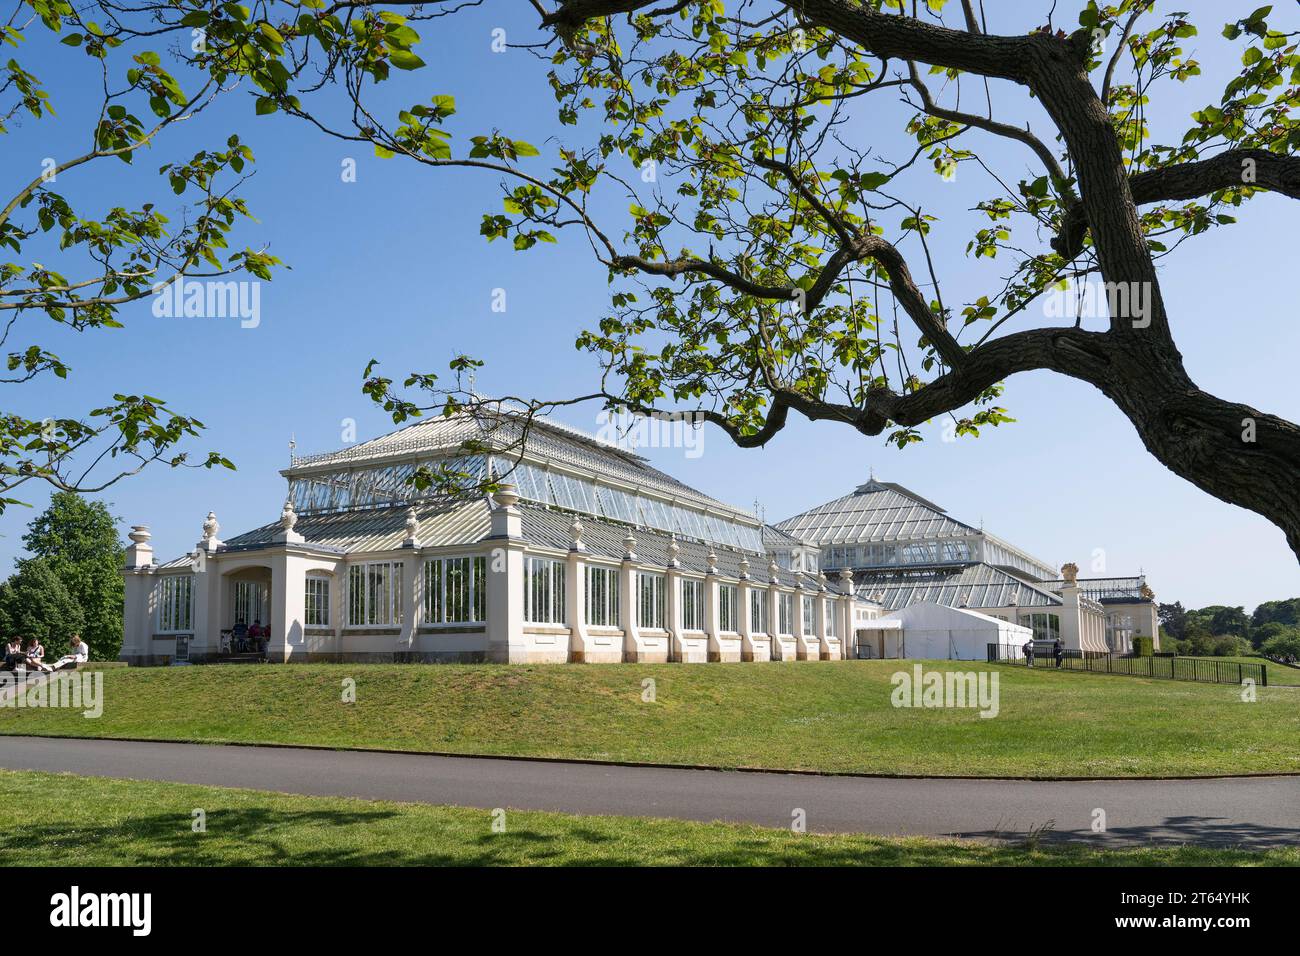 Temperate House, the largest Victorian greenhouse in the world, Royal Botanic Gardens (Kew Gardens), UNESCO World Heritage Site, Kew, Greater London Stock Photo